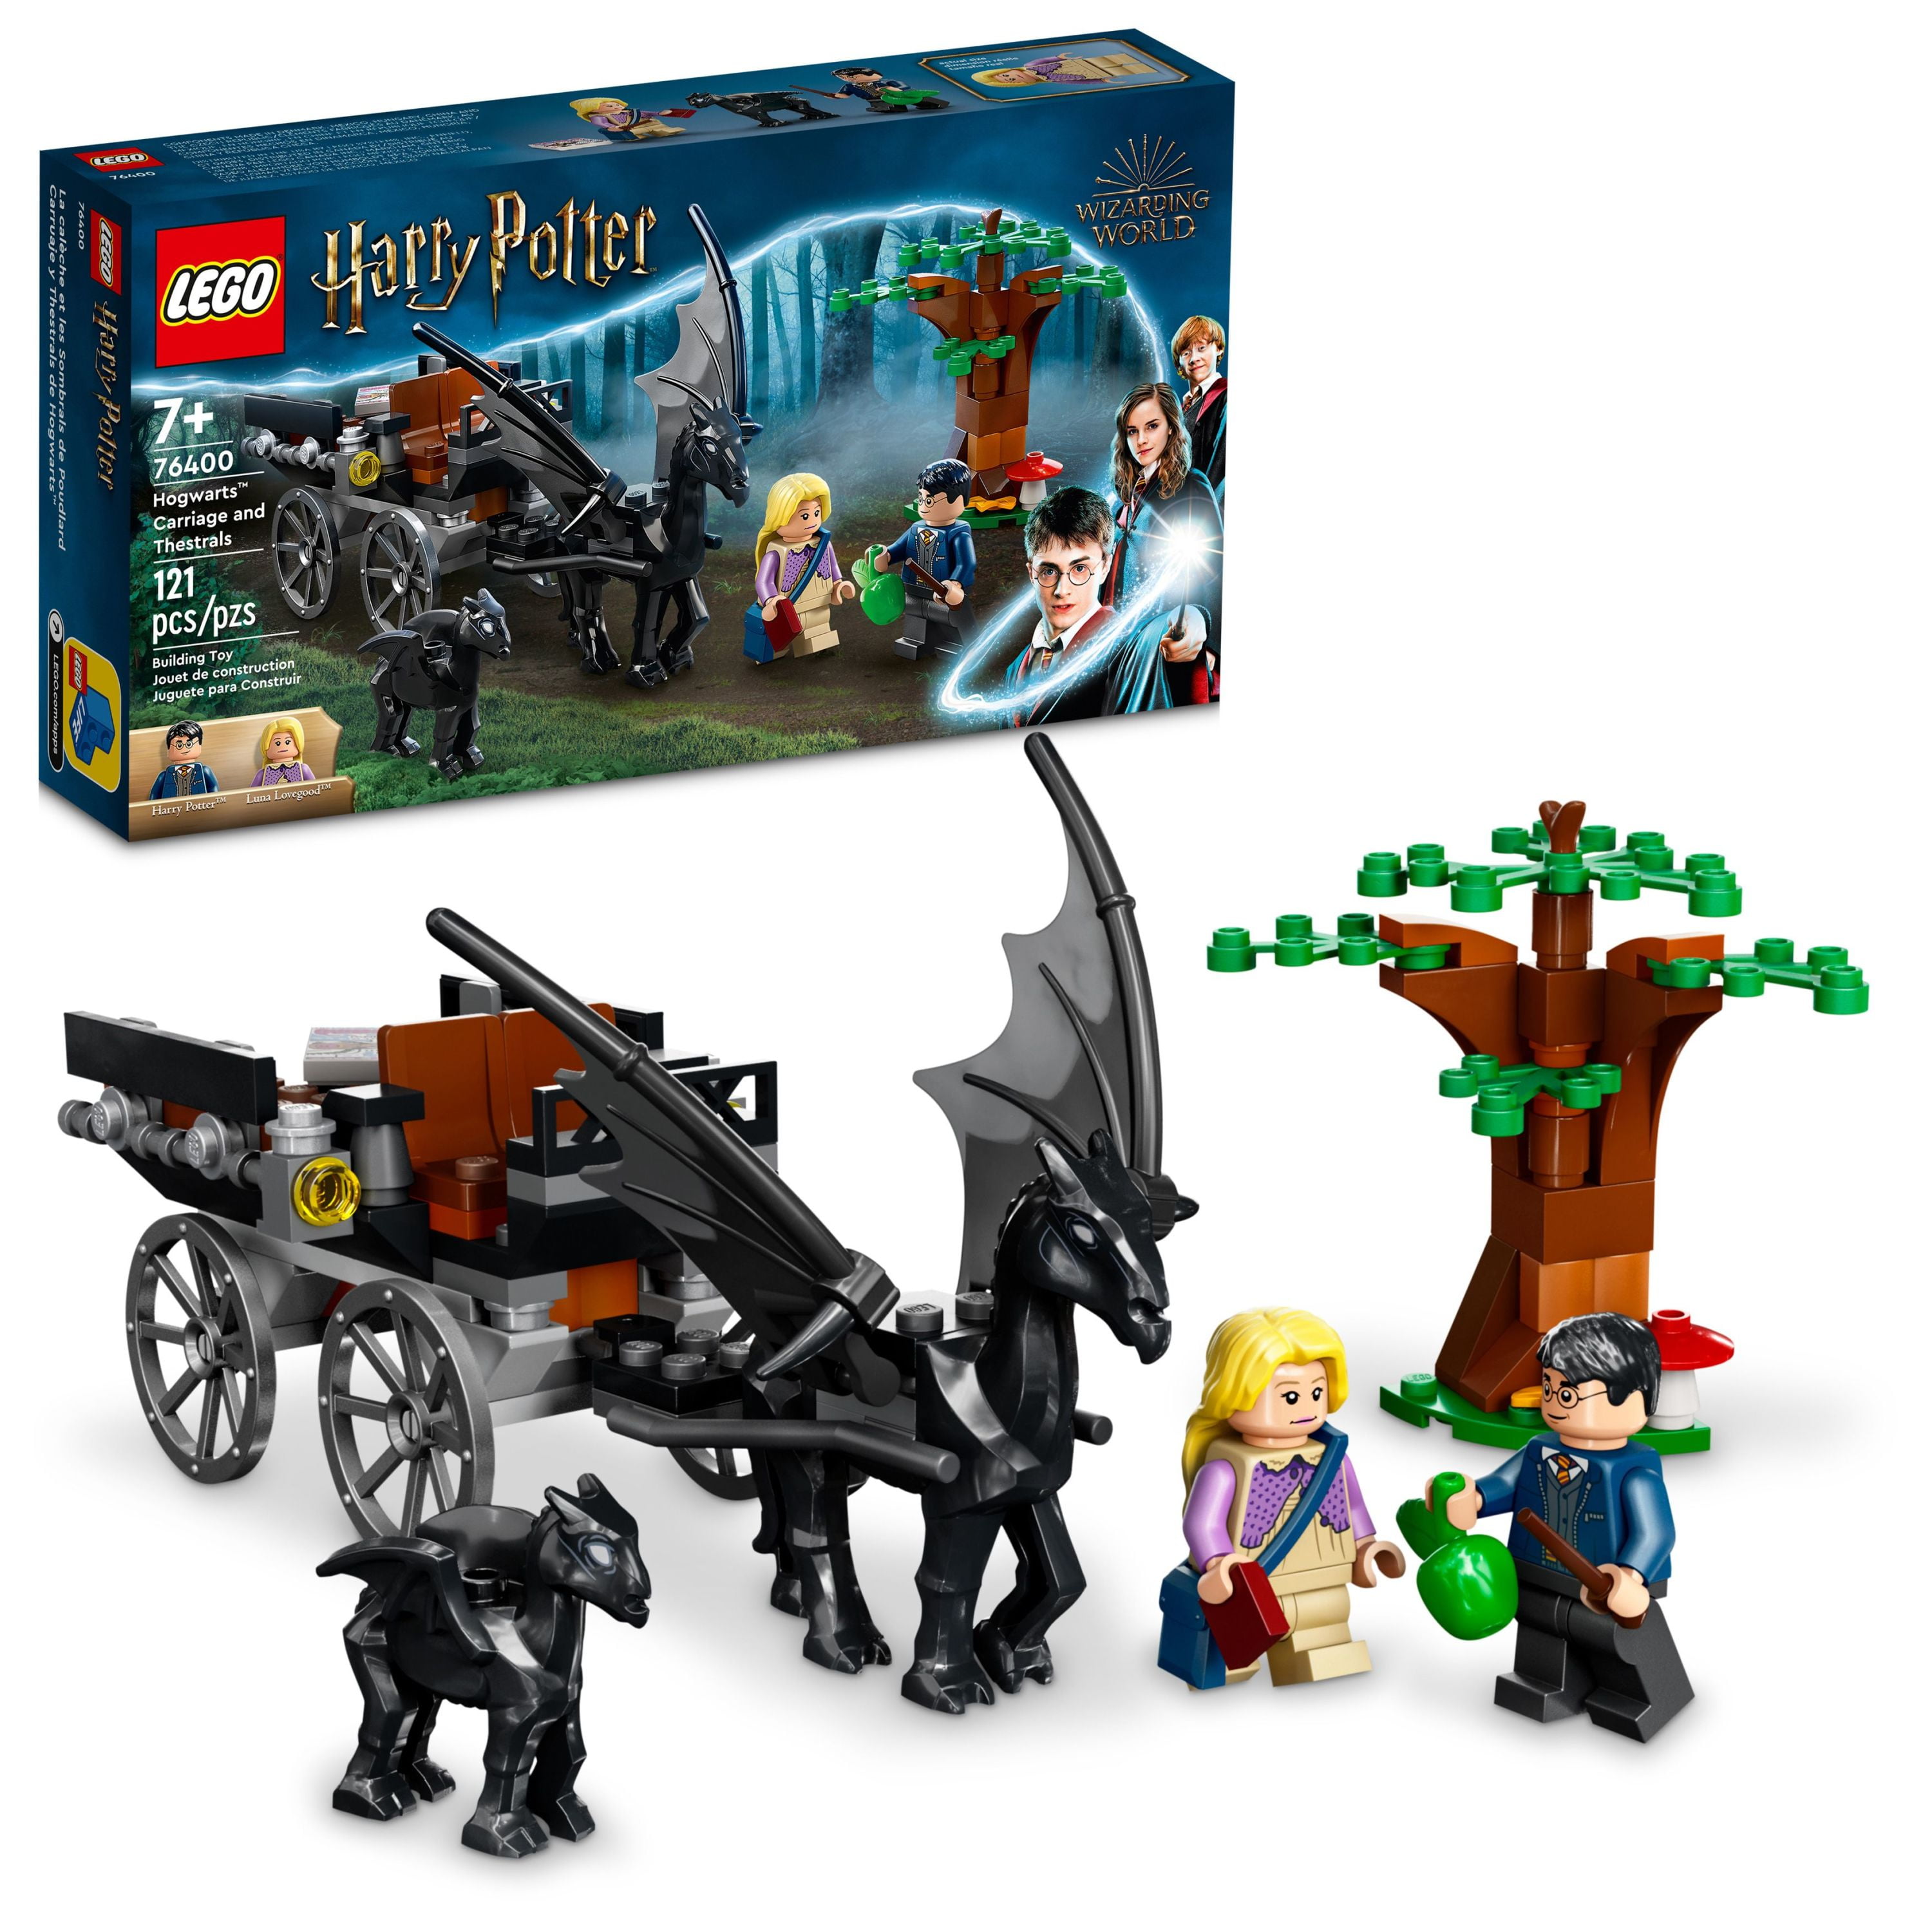 overalt rig sætte ild LEGO Harry Potter Hogwarts Carriage & Thestrals Set 76400, Building Toy for  Kids 7 Plus Years Old with 2 Winged Horse Figures and Luna Lovegood  Minifigure - Walmart.com